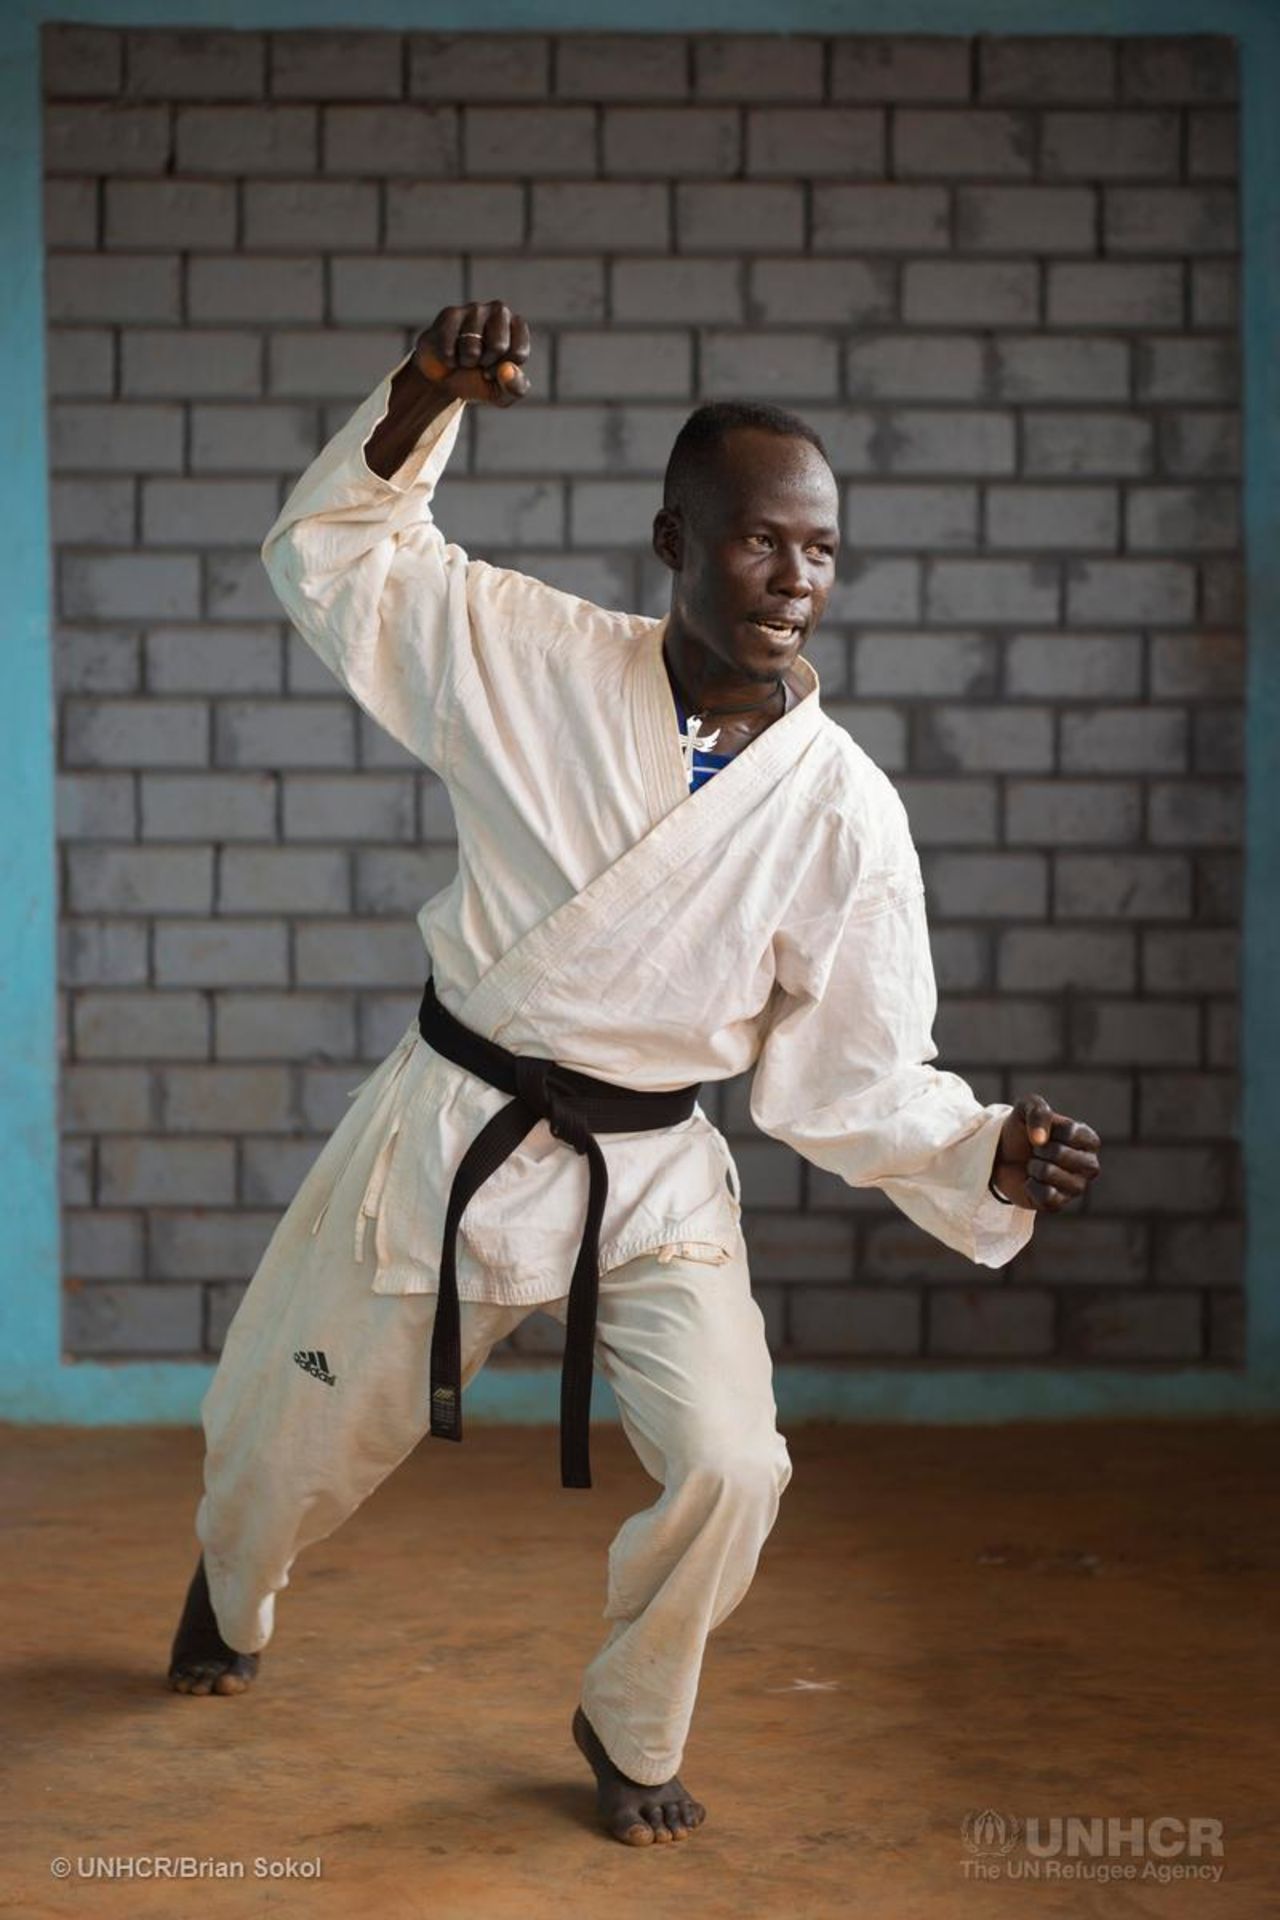 Martial Nantouna, 36, won the national championship in karate for his age group in 1998 and 2000, and was named runner-up for all of Africa in 1998. <br /><br />"My best performance was at the Africa championship. I brought back two medals: the silver medal for the individual games and the bronze medal for the team. I am still on the national team."